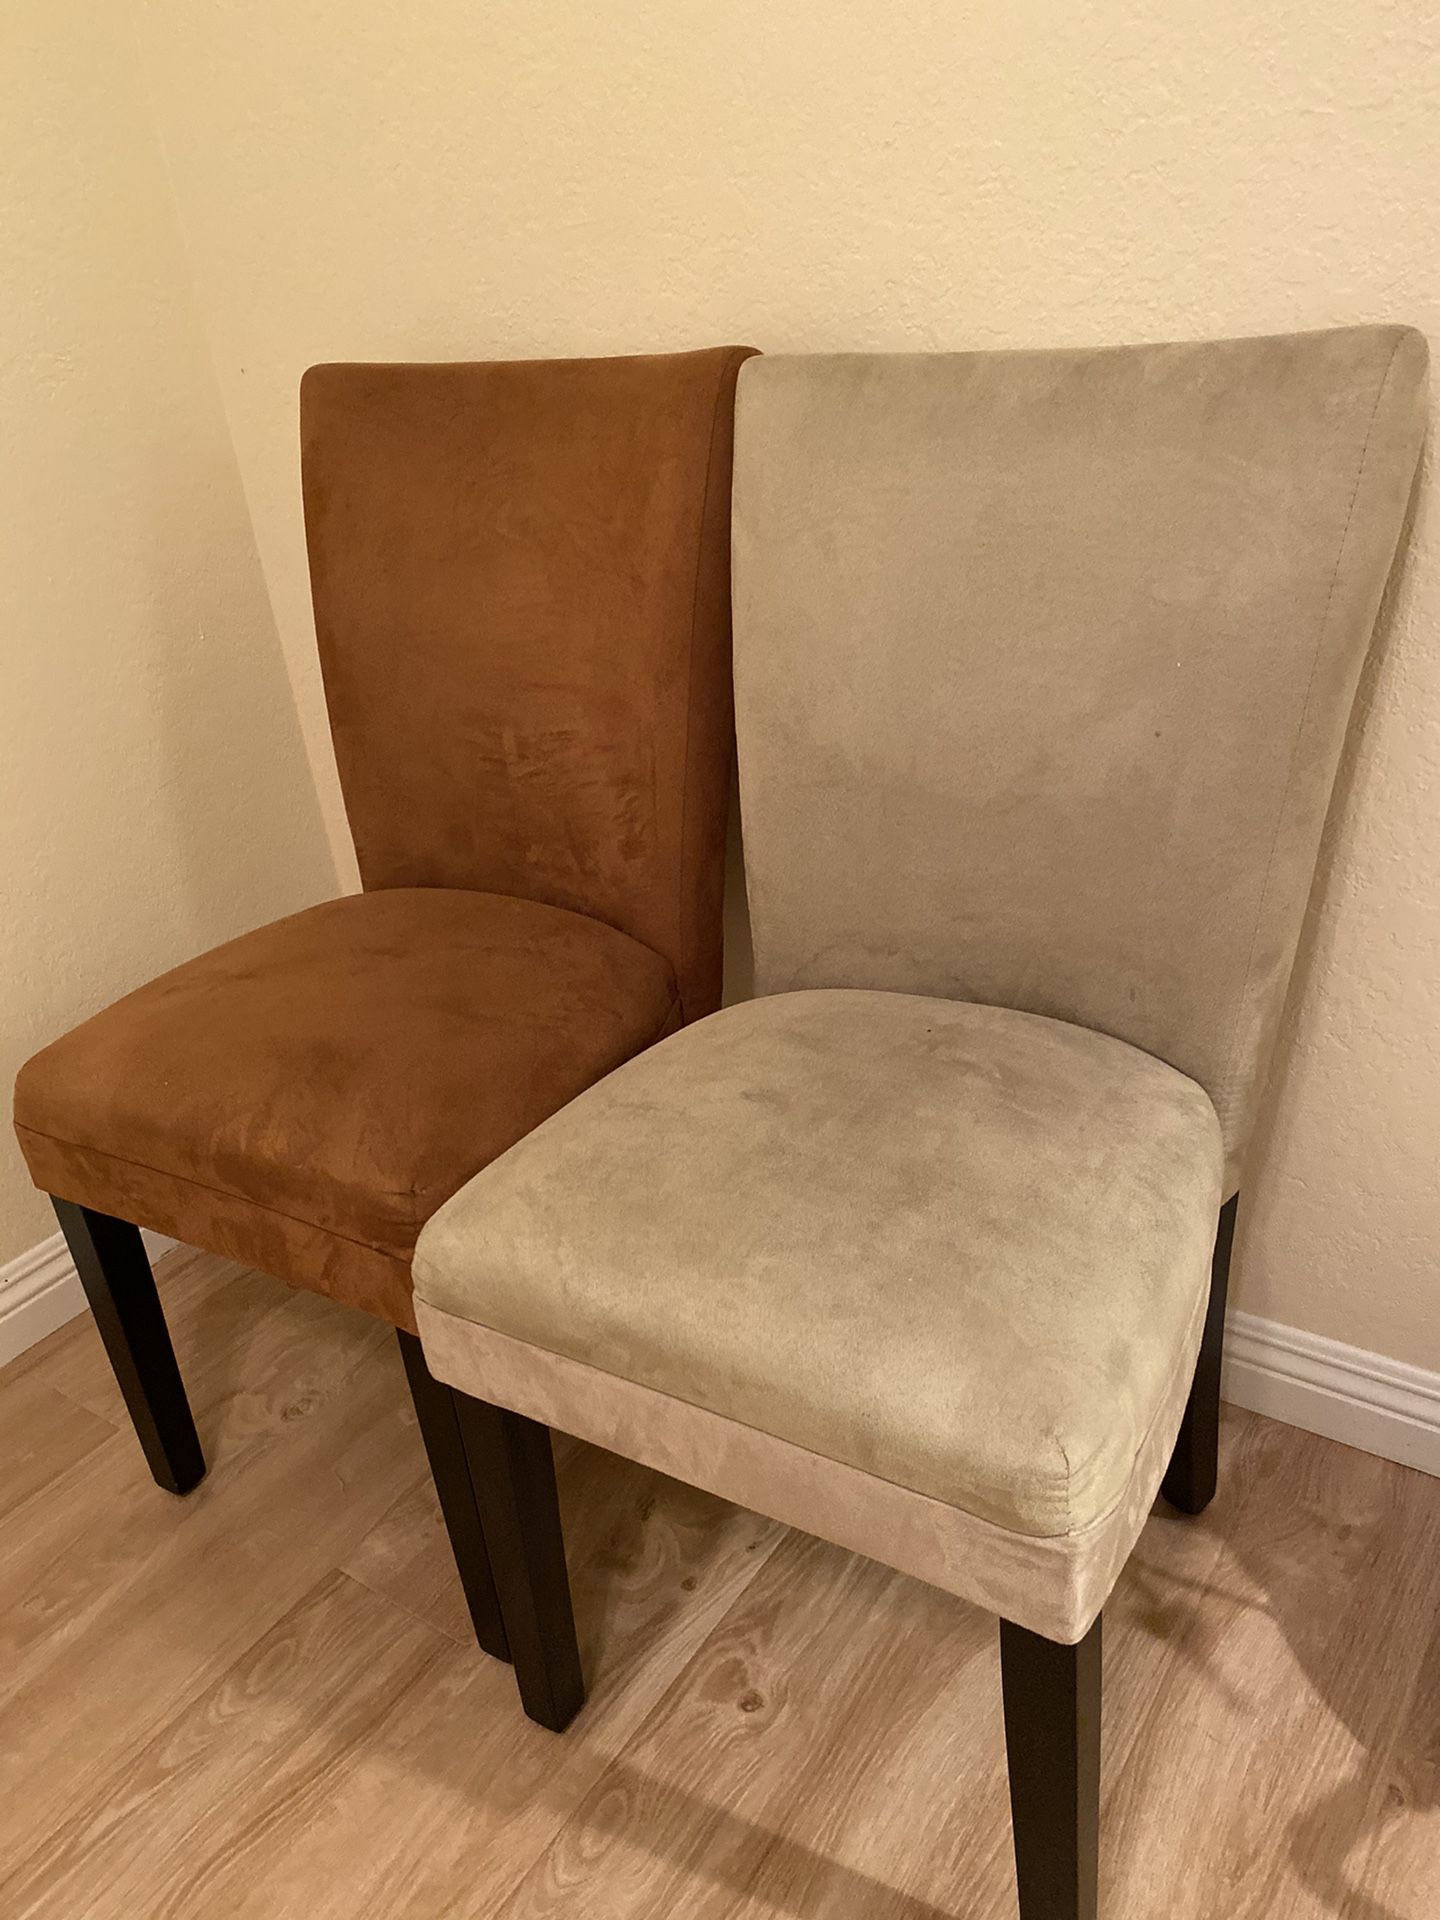 6 Parson Chairs for $40